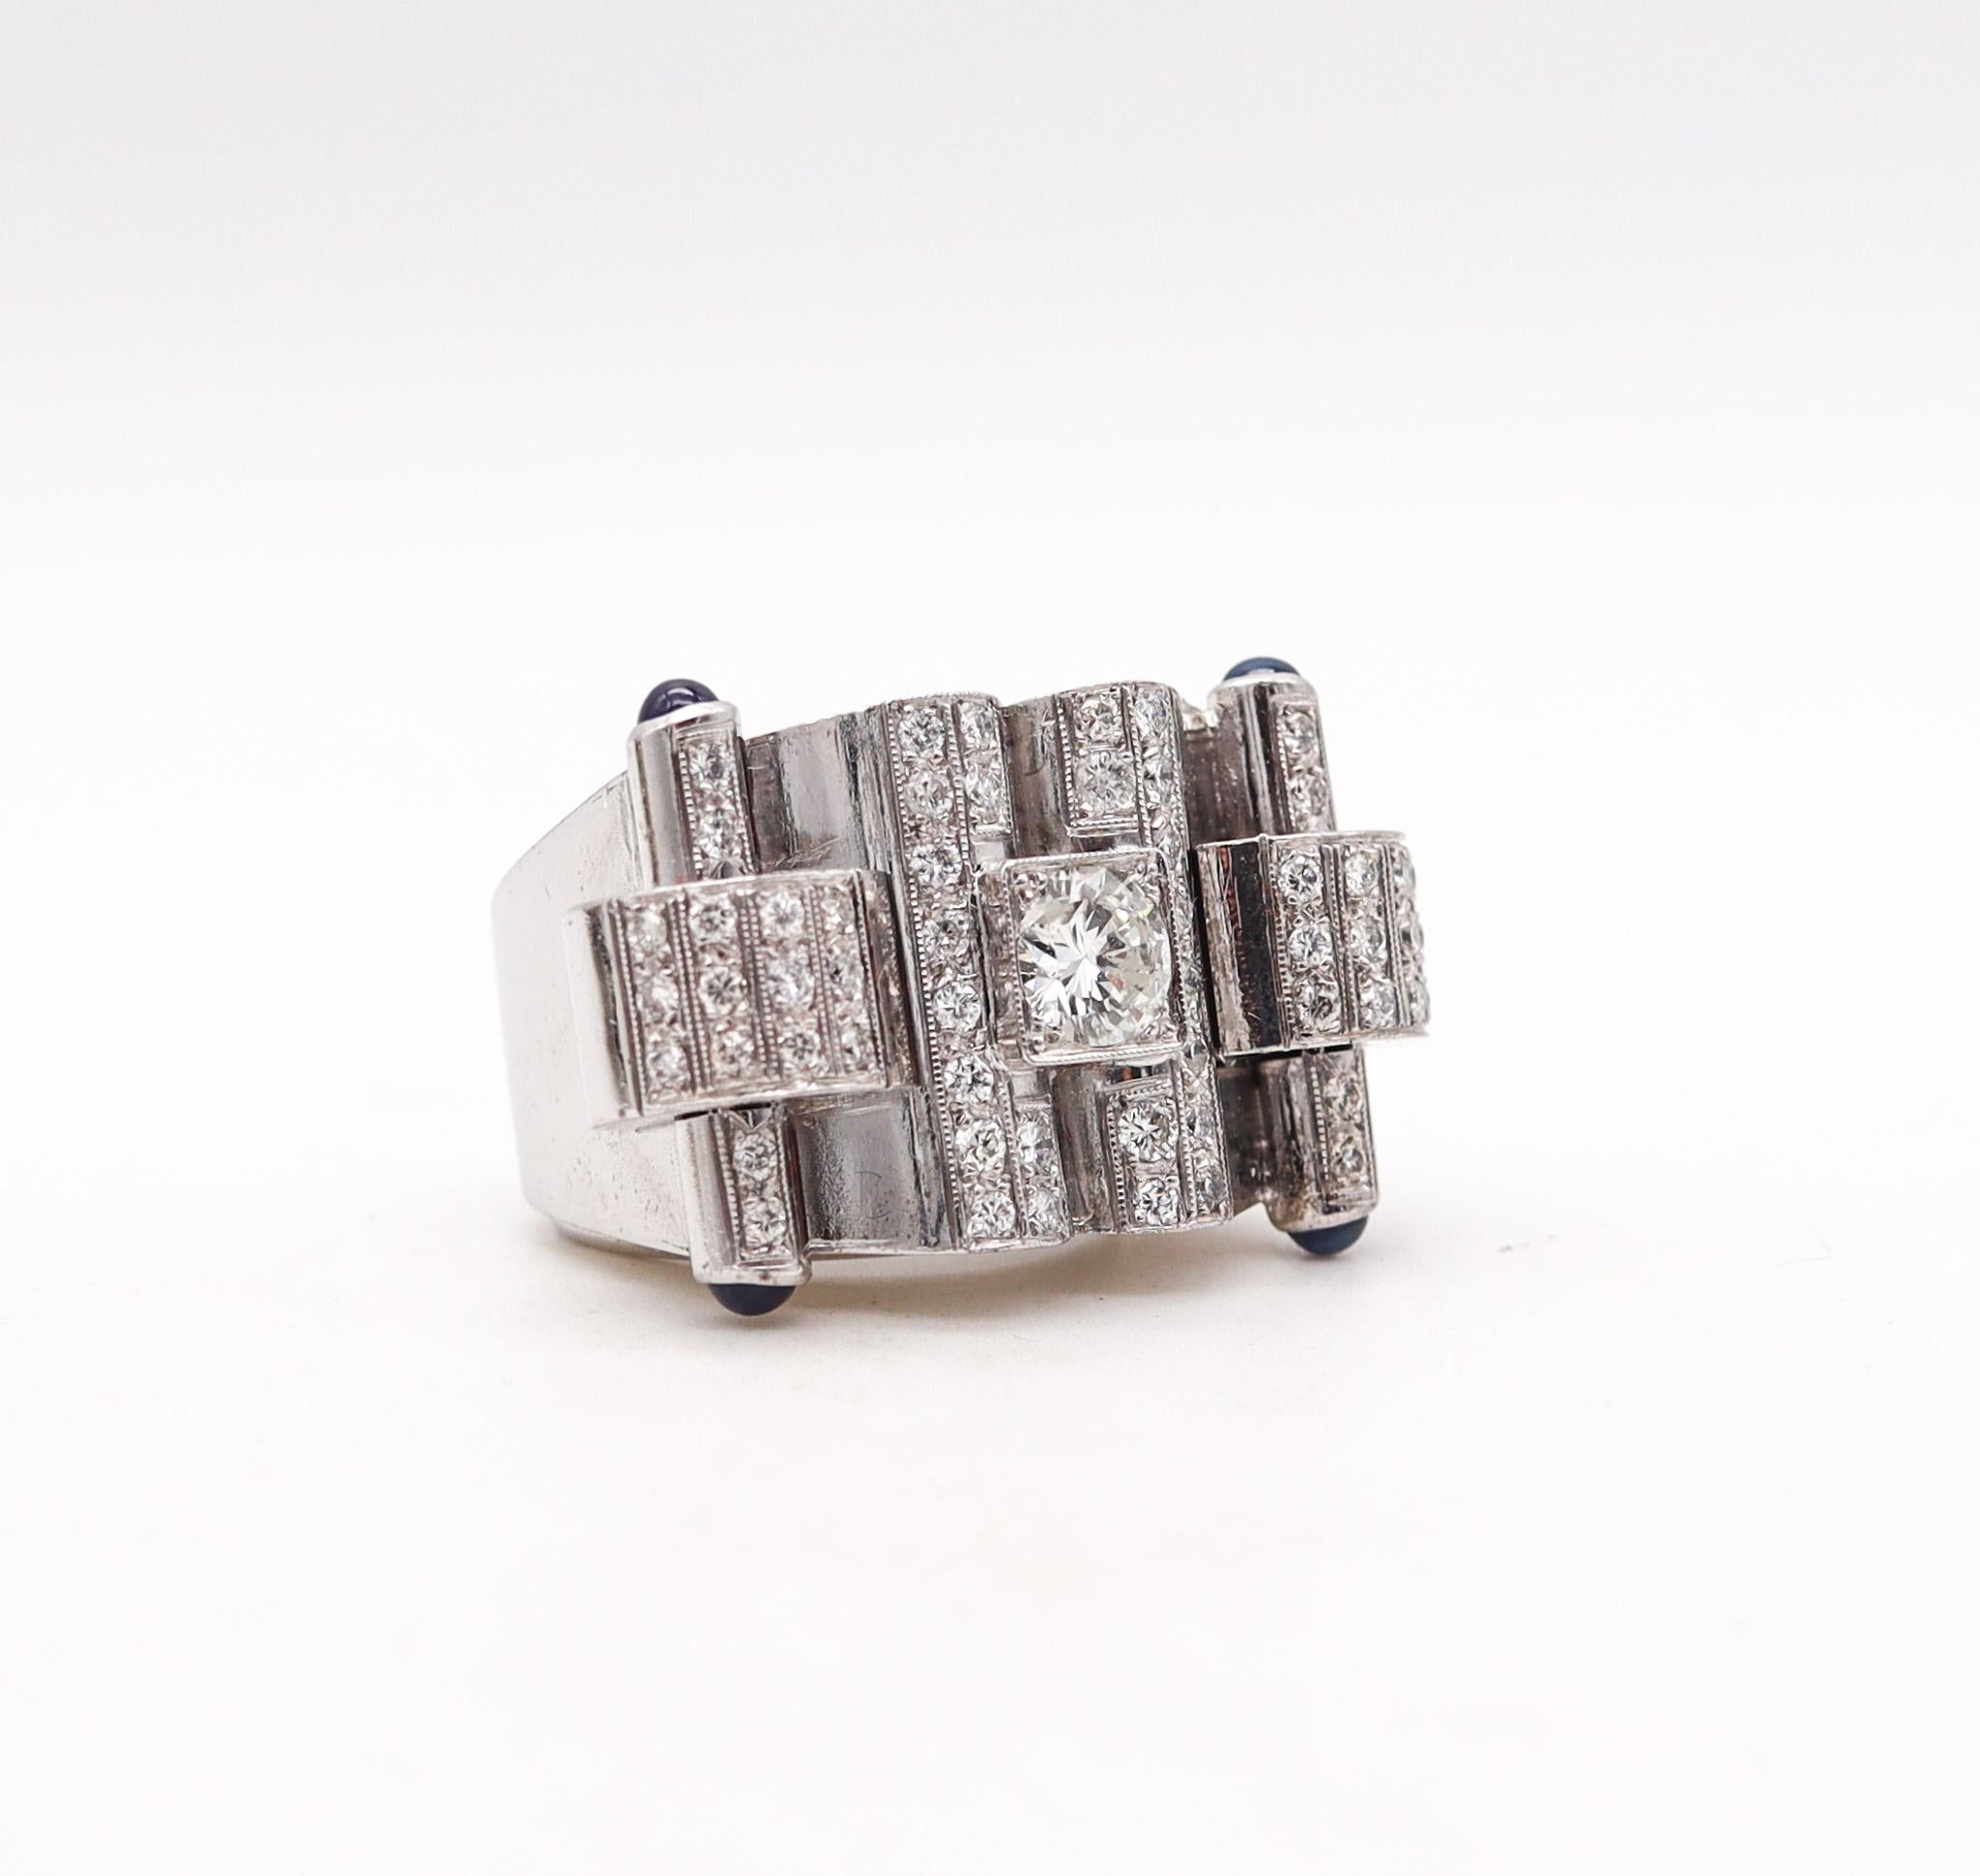 Deco-Retro geometric ring from the machine age period.

Stunning and unusual geometric piece, created during the late art-deco and the retro periods, back in the 1935. This cocktail ring has been crafted with bold volumetric patterns in solid white